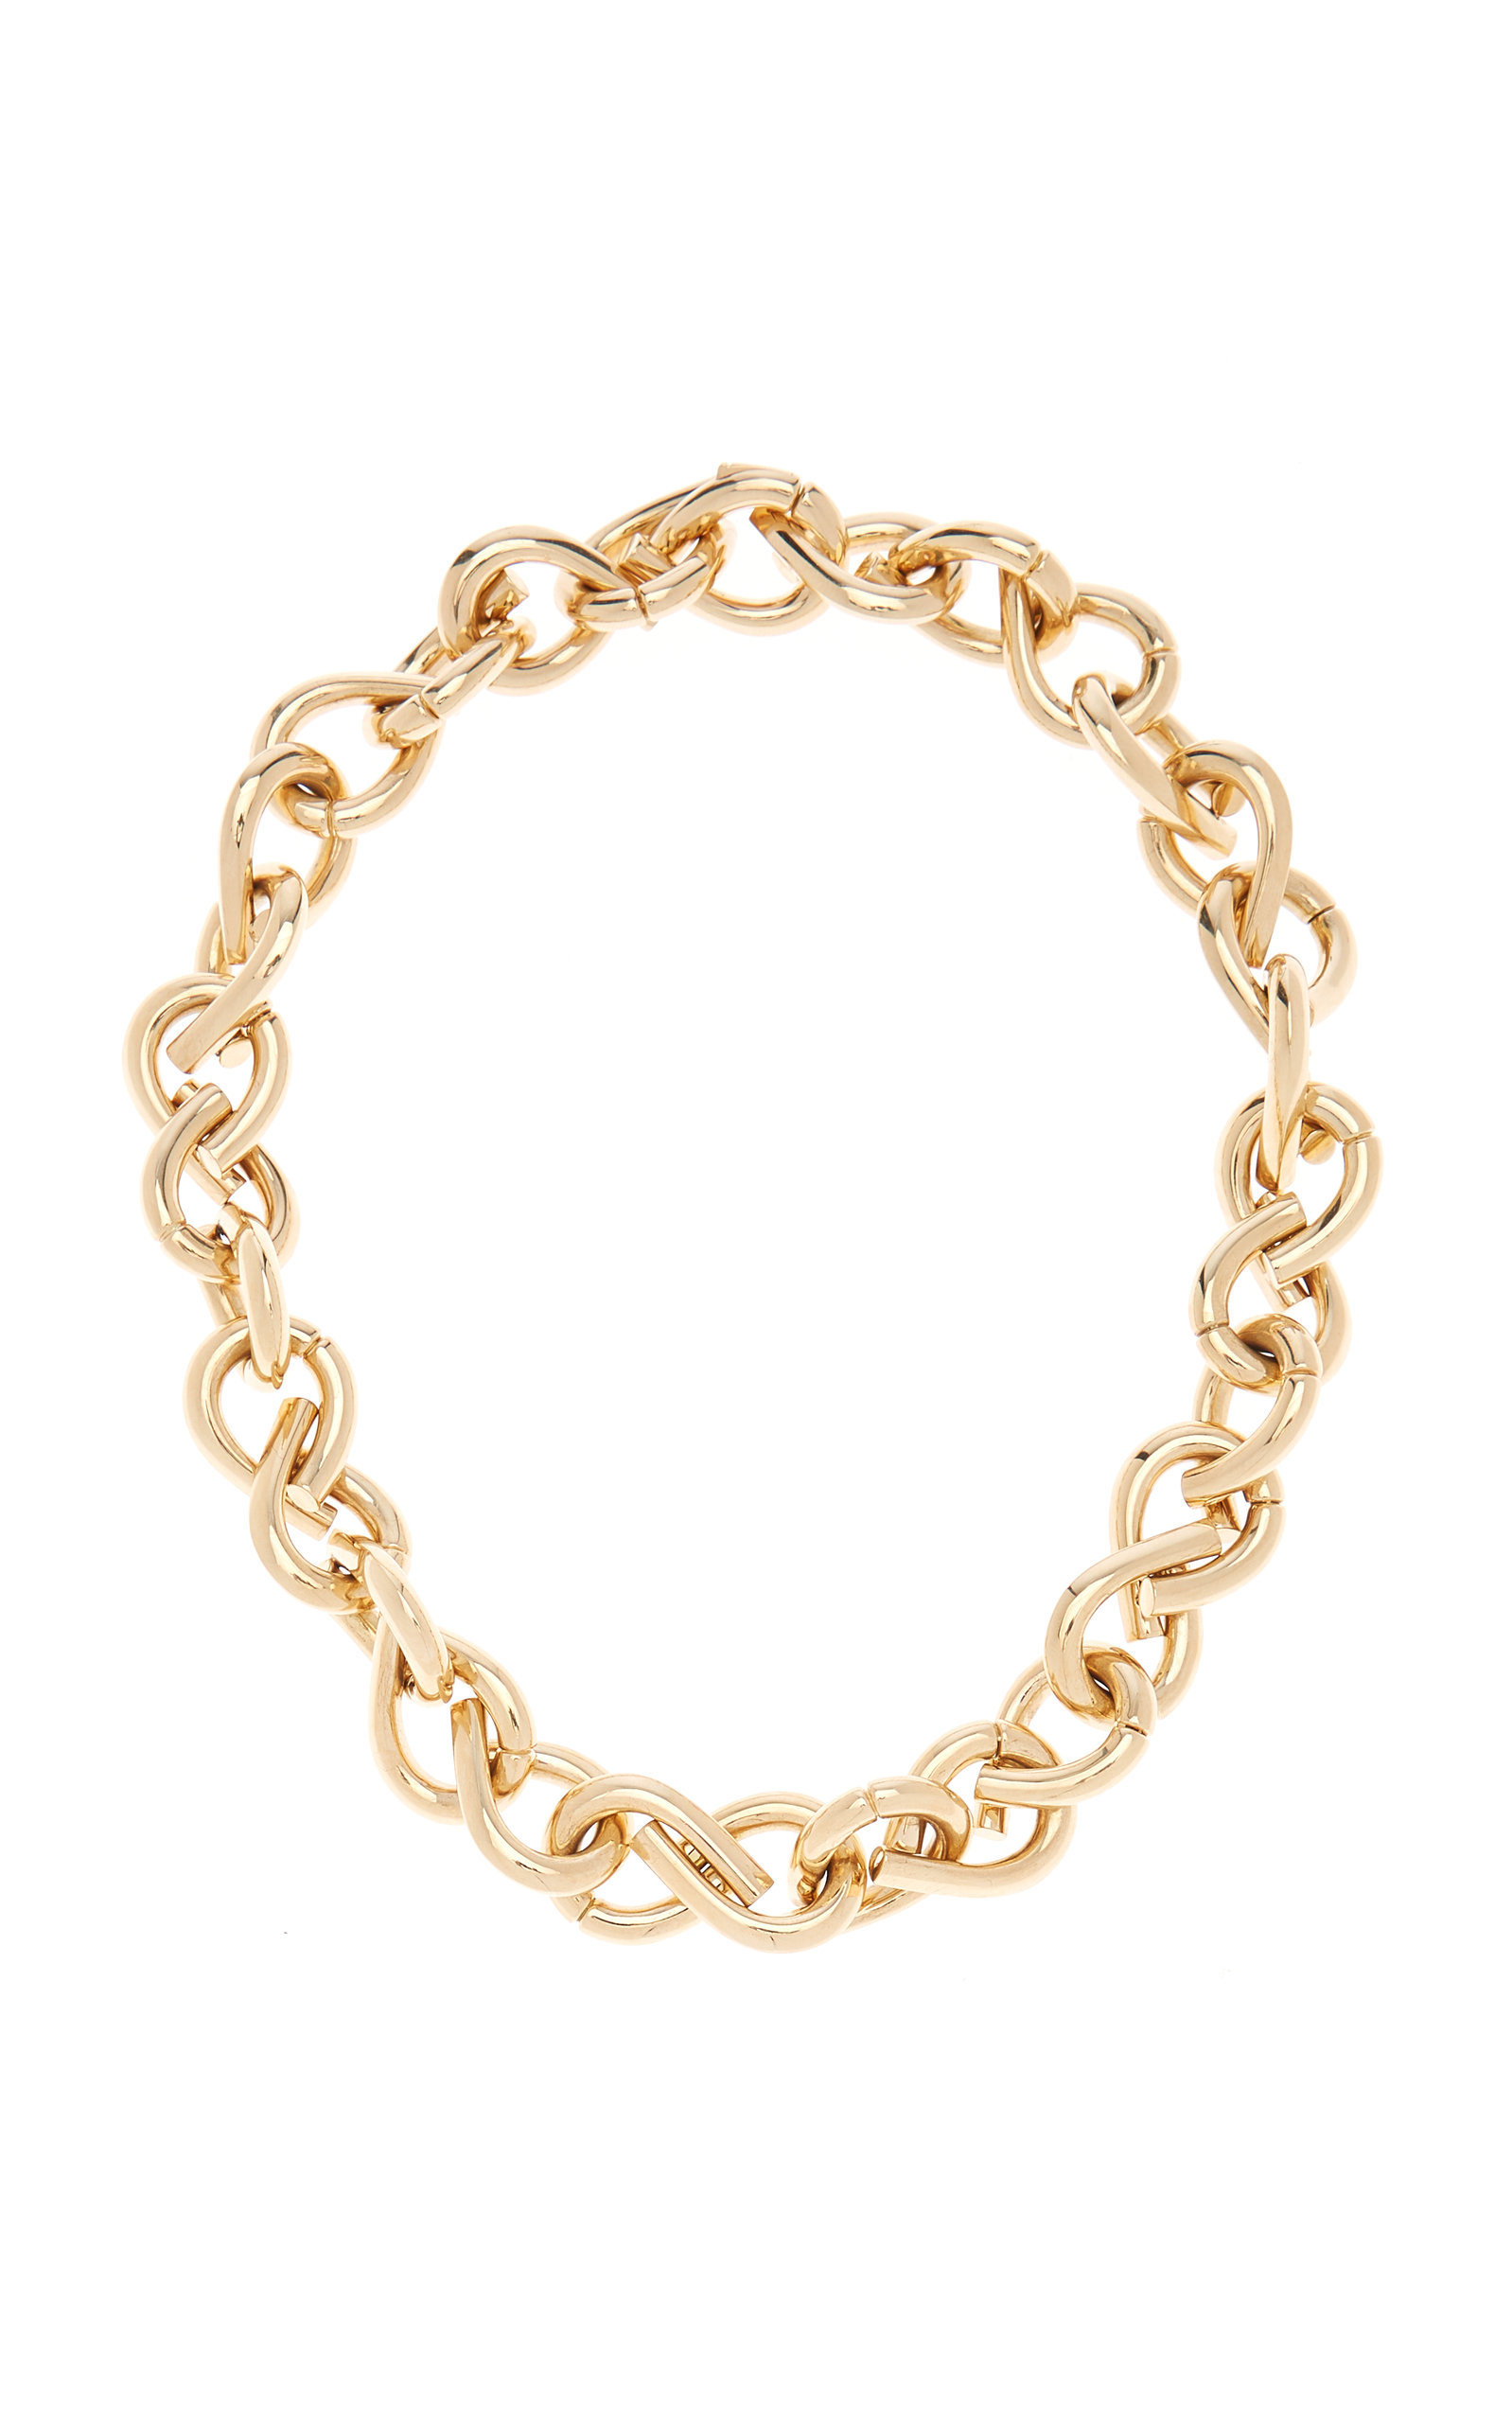 Oera 18K Fairmined Yellow Gold Necklace